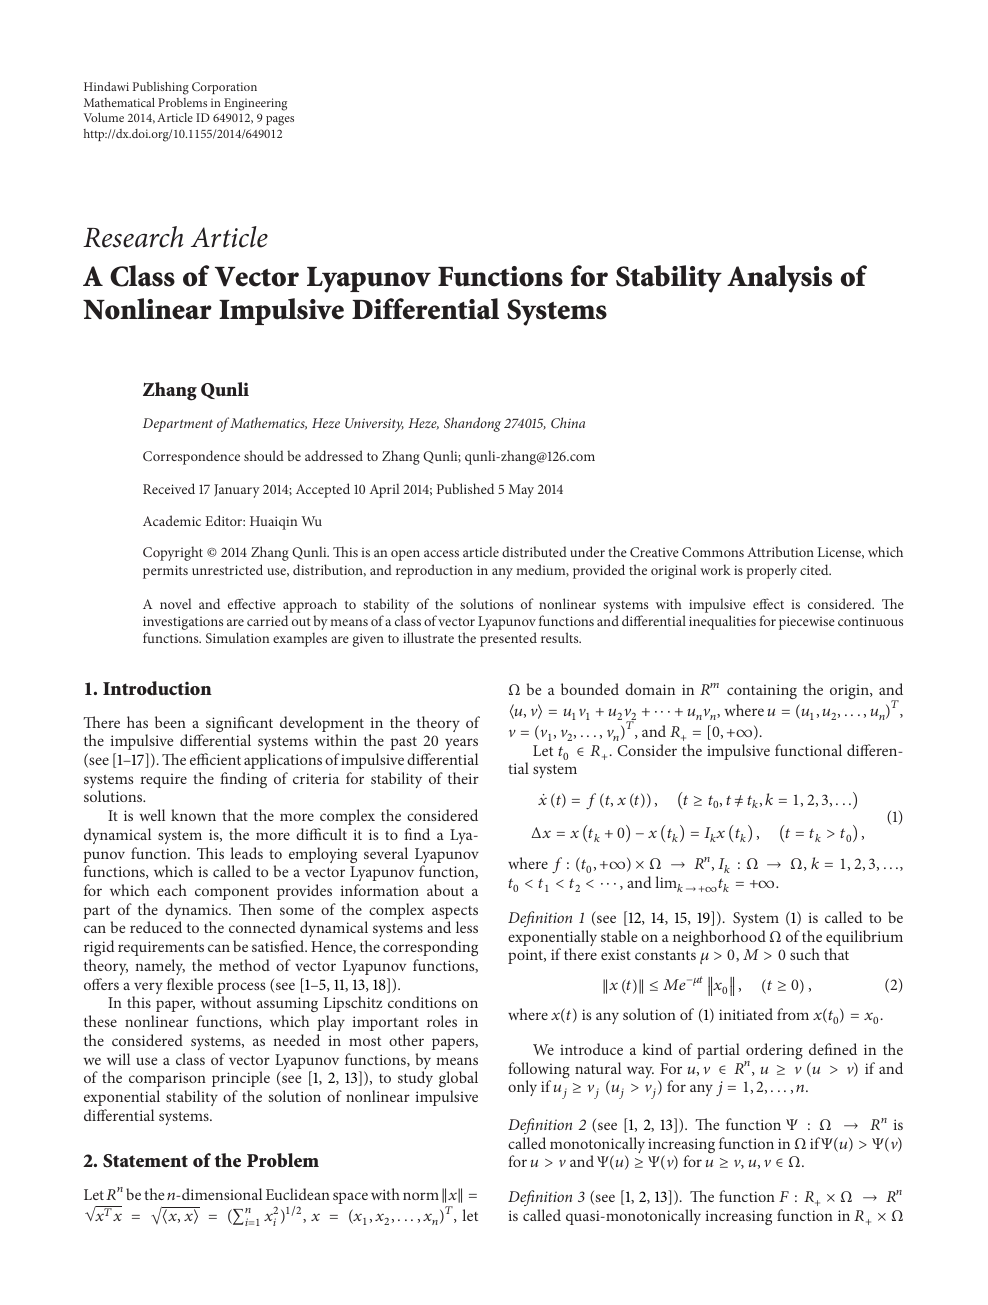 A Class Of Vector Lyapunov Functions For Stability Analysis Of Nonlinear Impulsive Differential Systems Topic Of Research Paper In Mathematics Download Scholarly Article Pdf And Read For Free On Cyberleninka Open